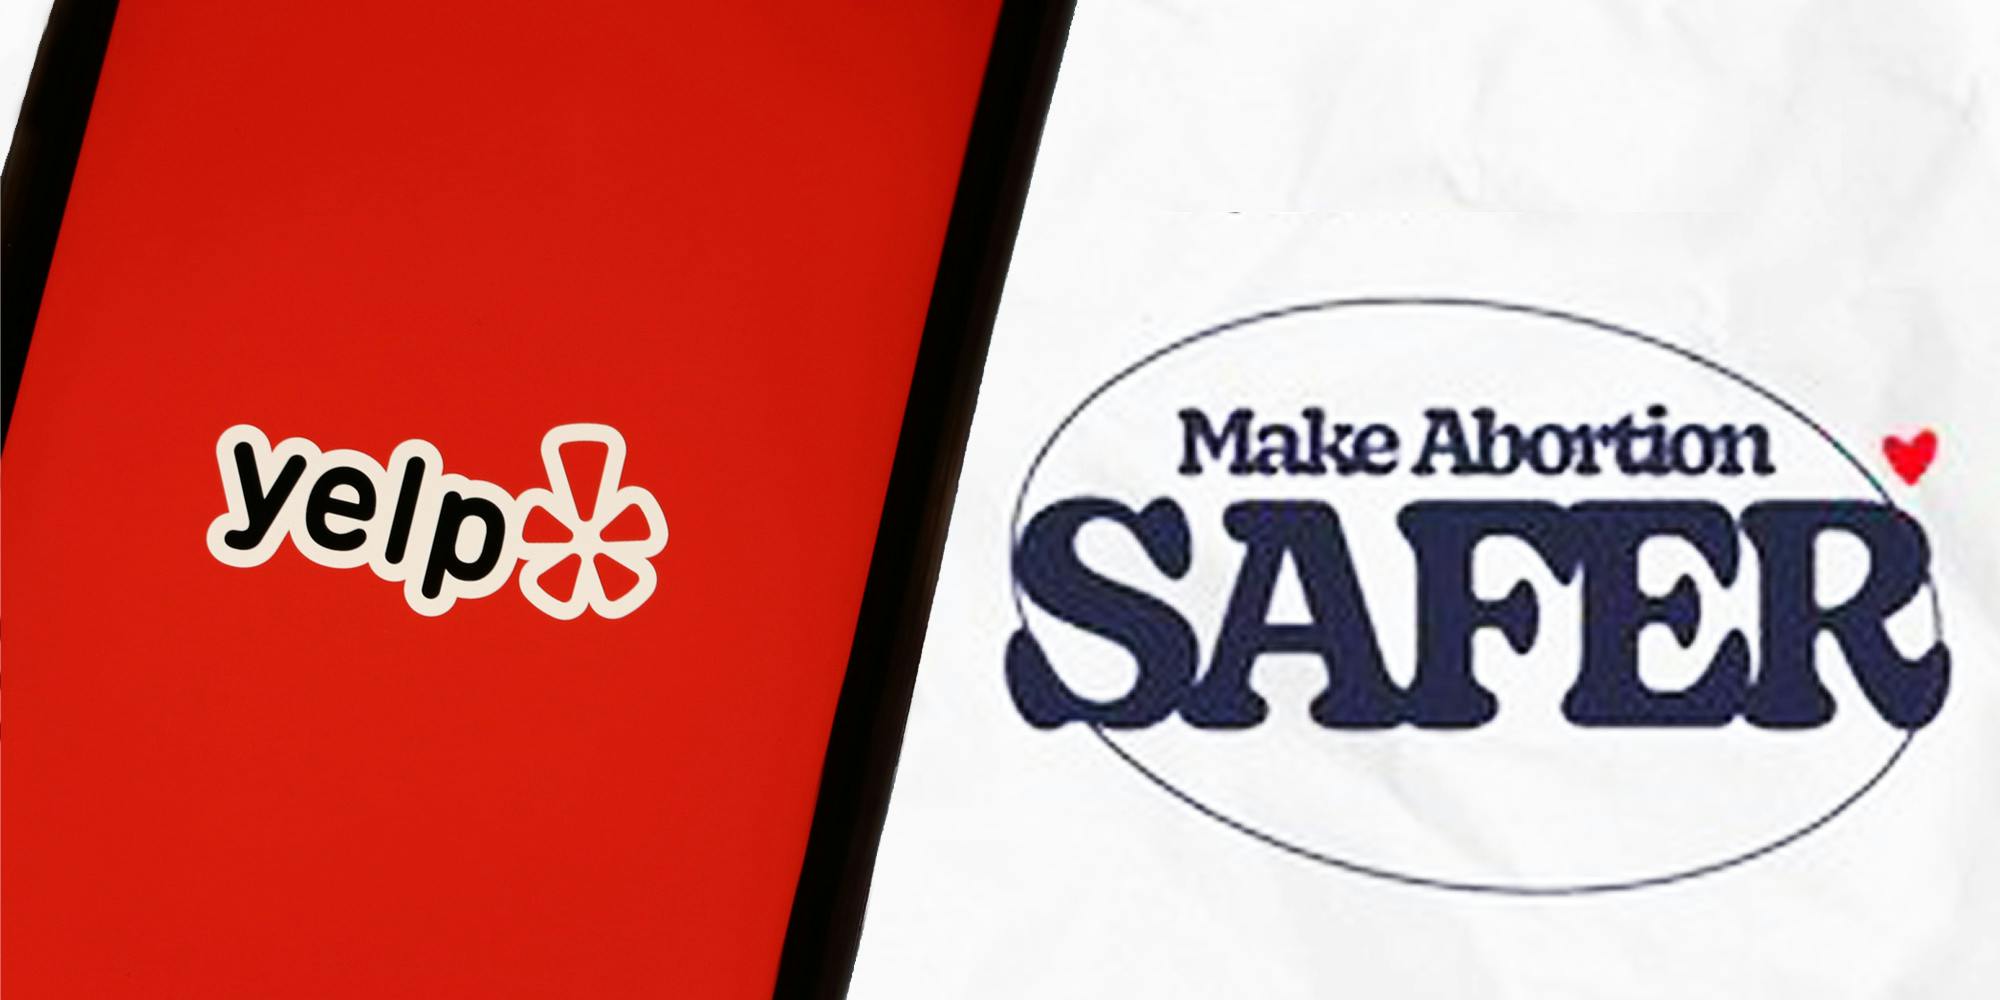 Yelp logo on red phone screen on left "Make Abortion SAFER" logo on right on white background